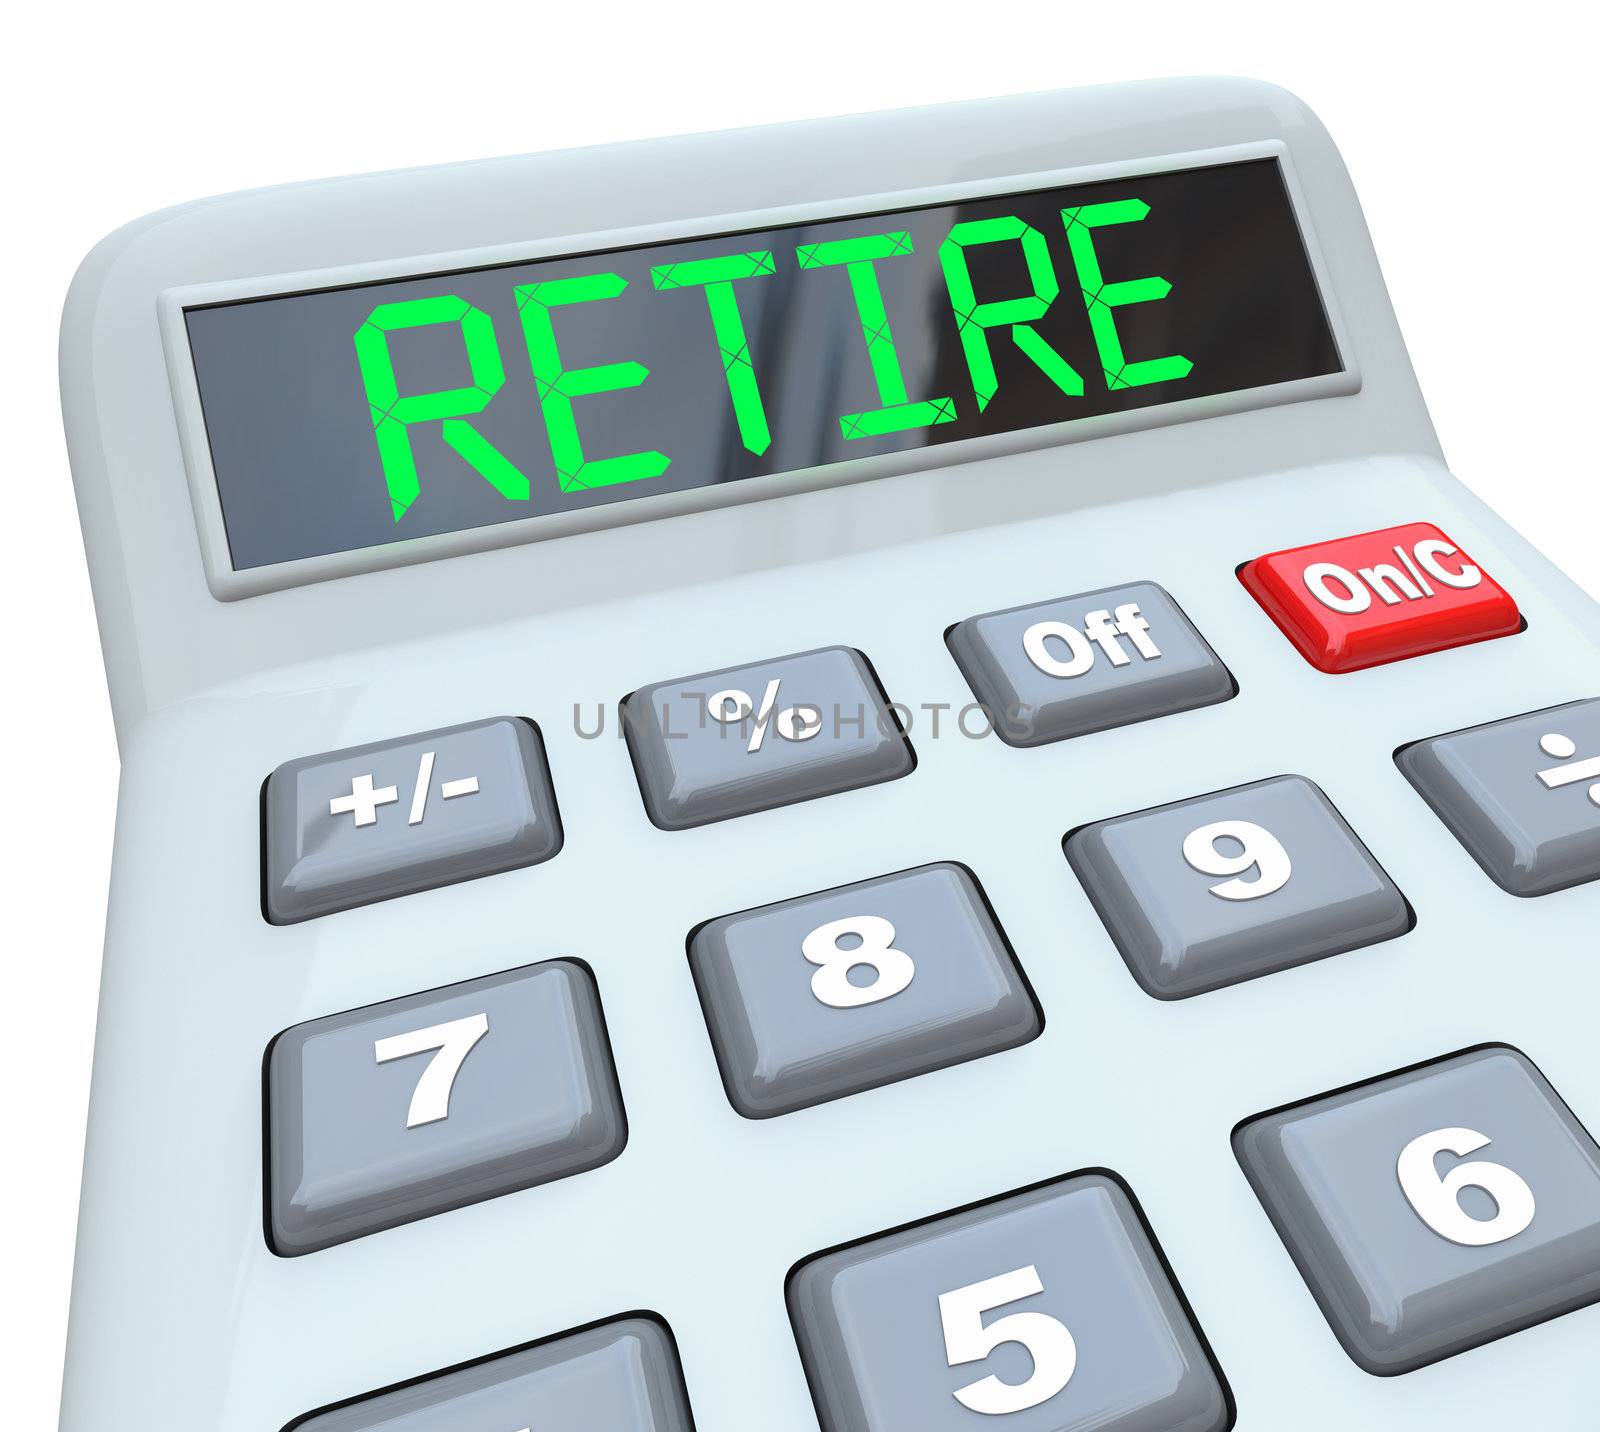 A plastic calculator displays the word Retire symbolizing the need to plan your financial security and savings for your future retirement